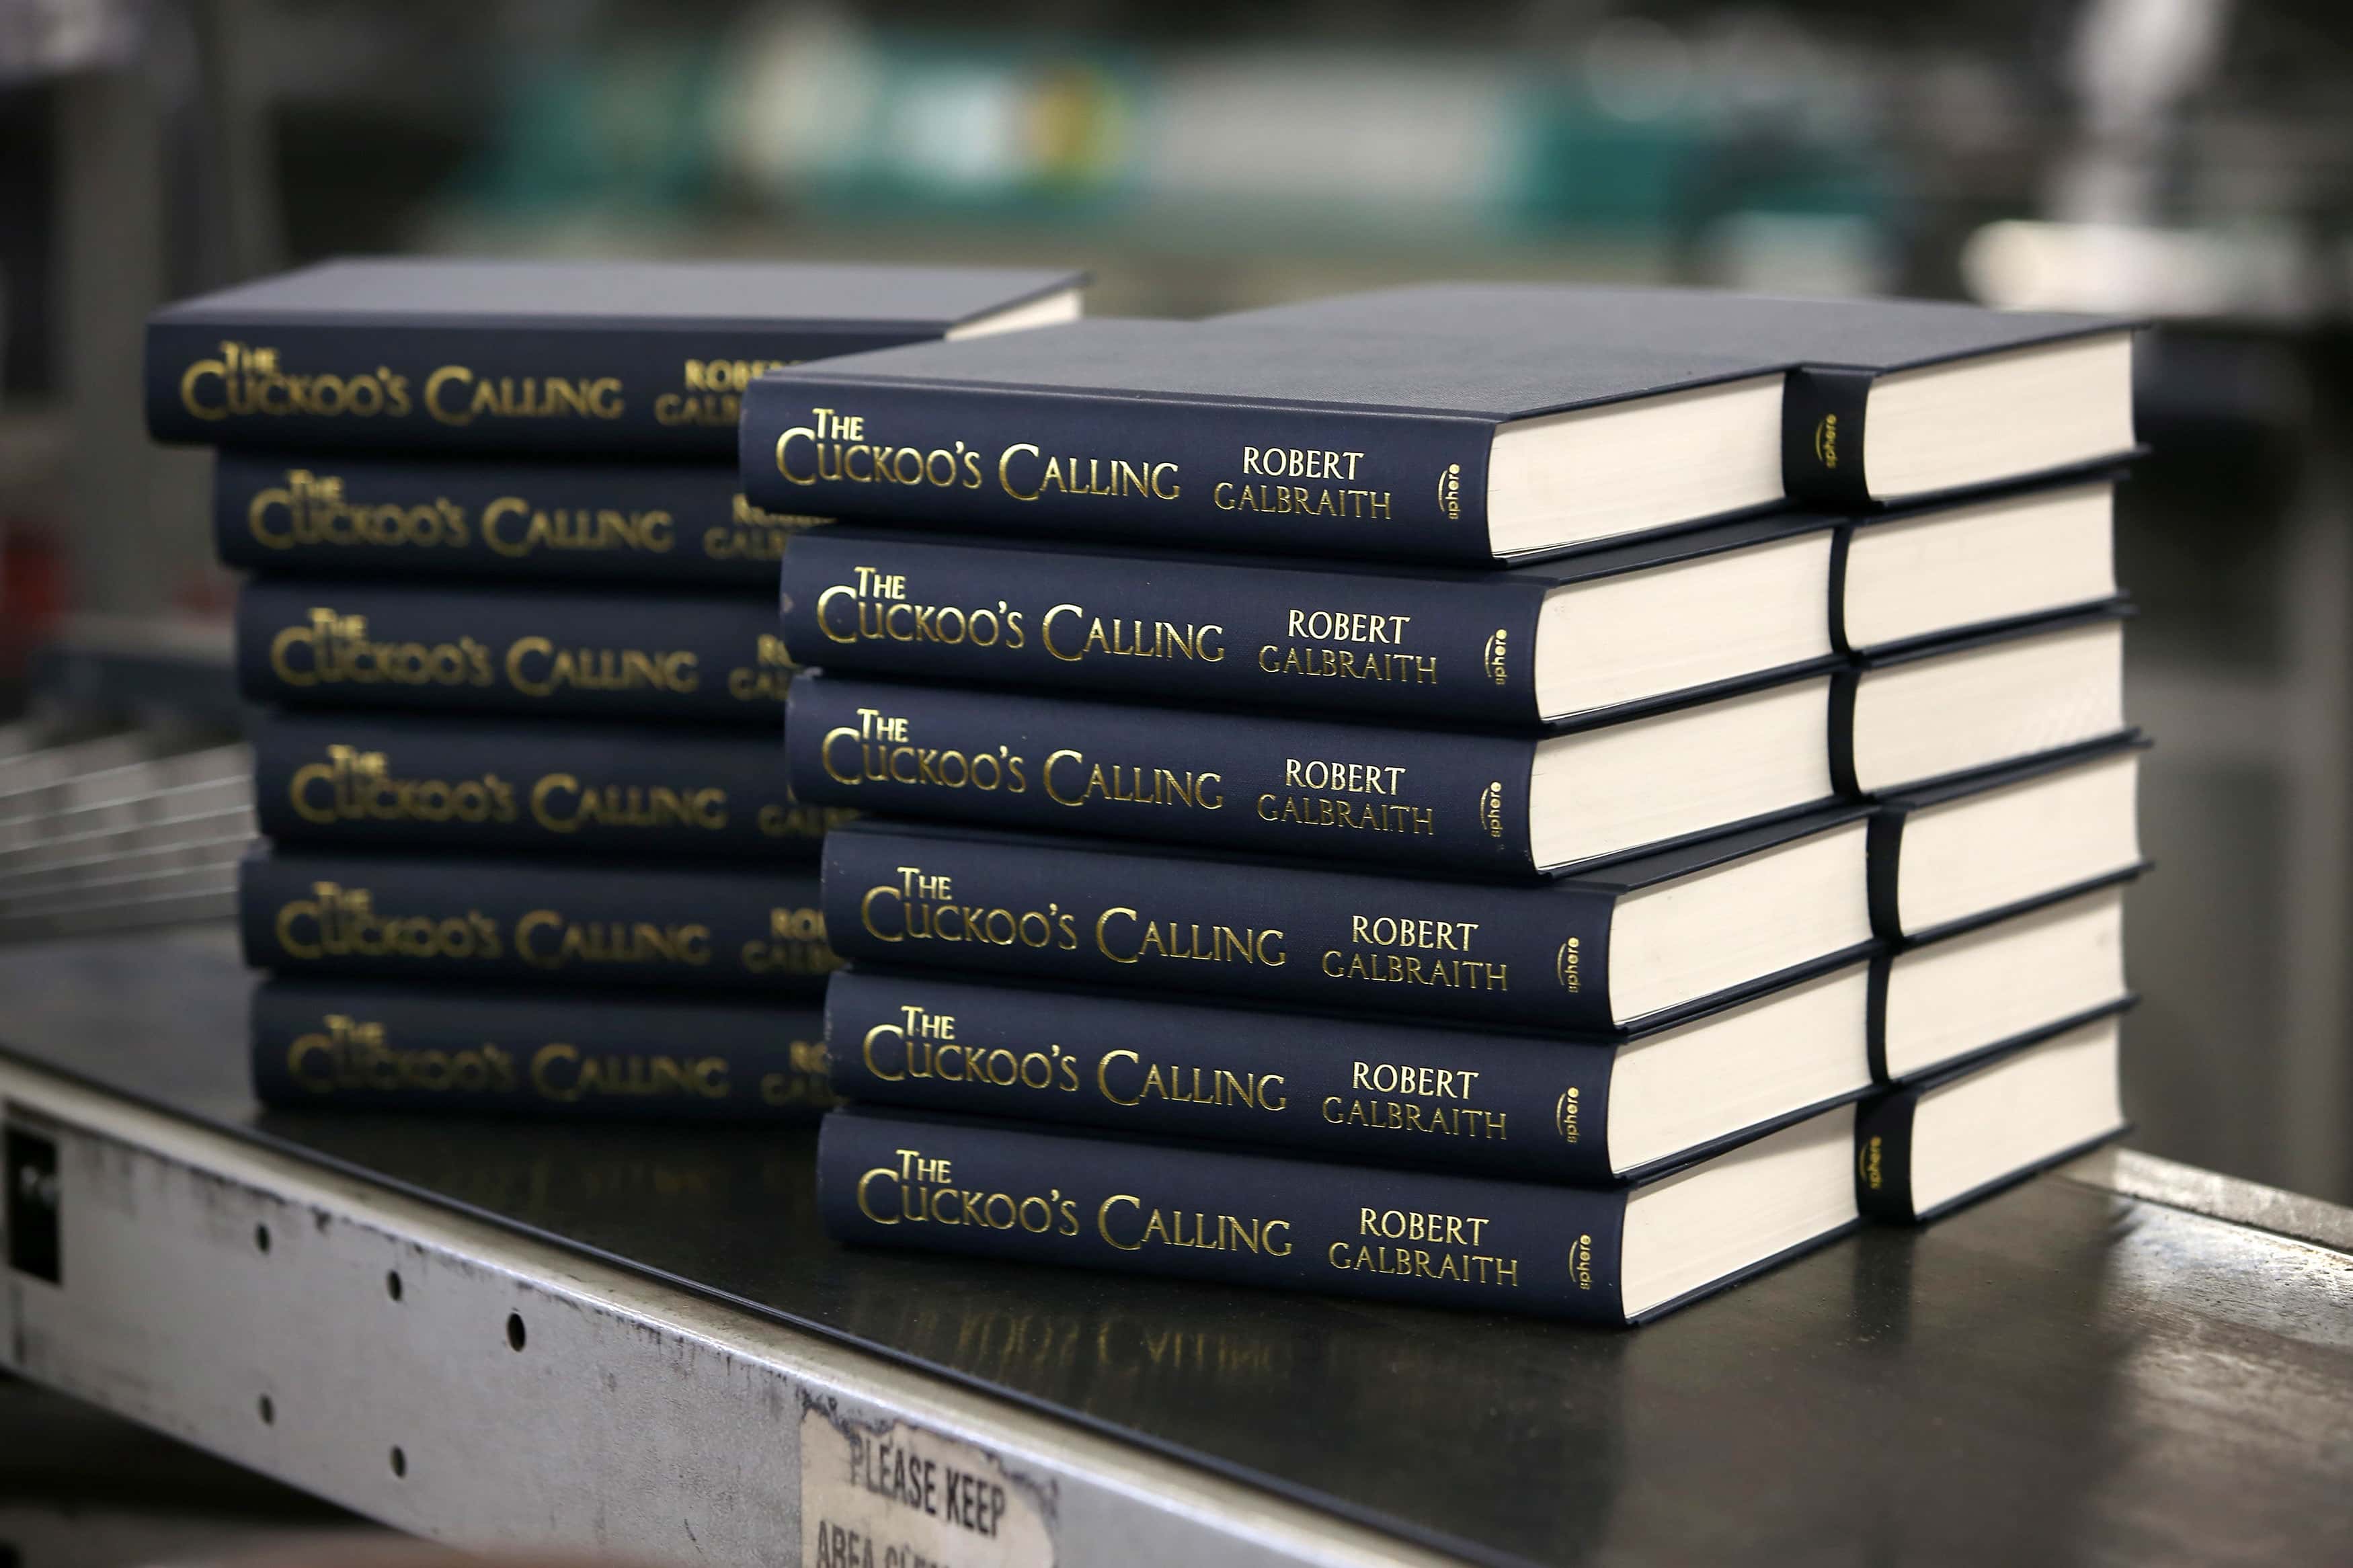 JK Rowling's Crime Novel Cuckoo's Calling Is Reprinted After Overnight Success